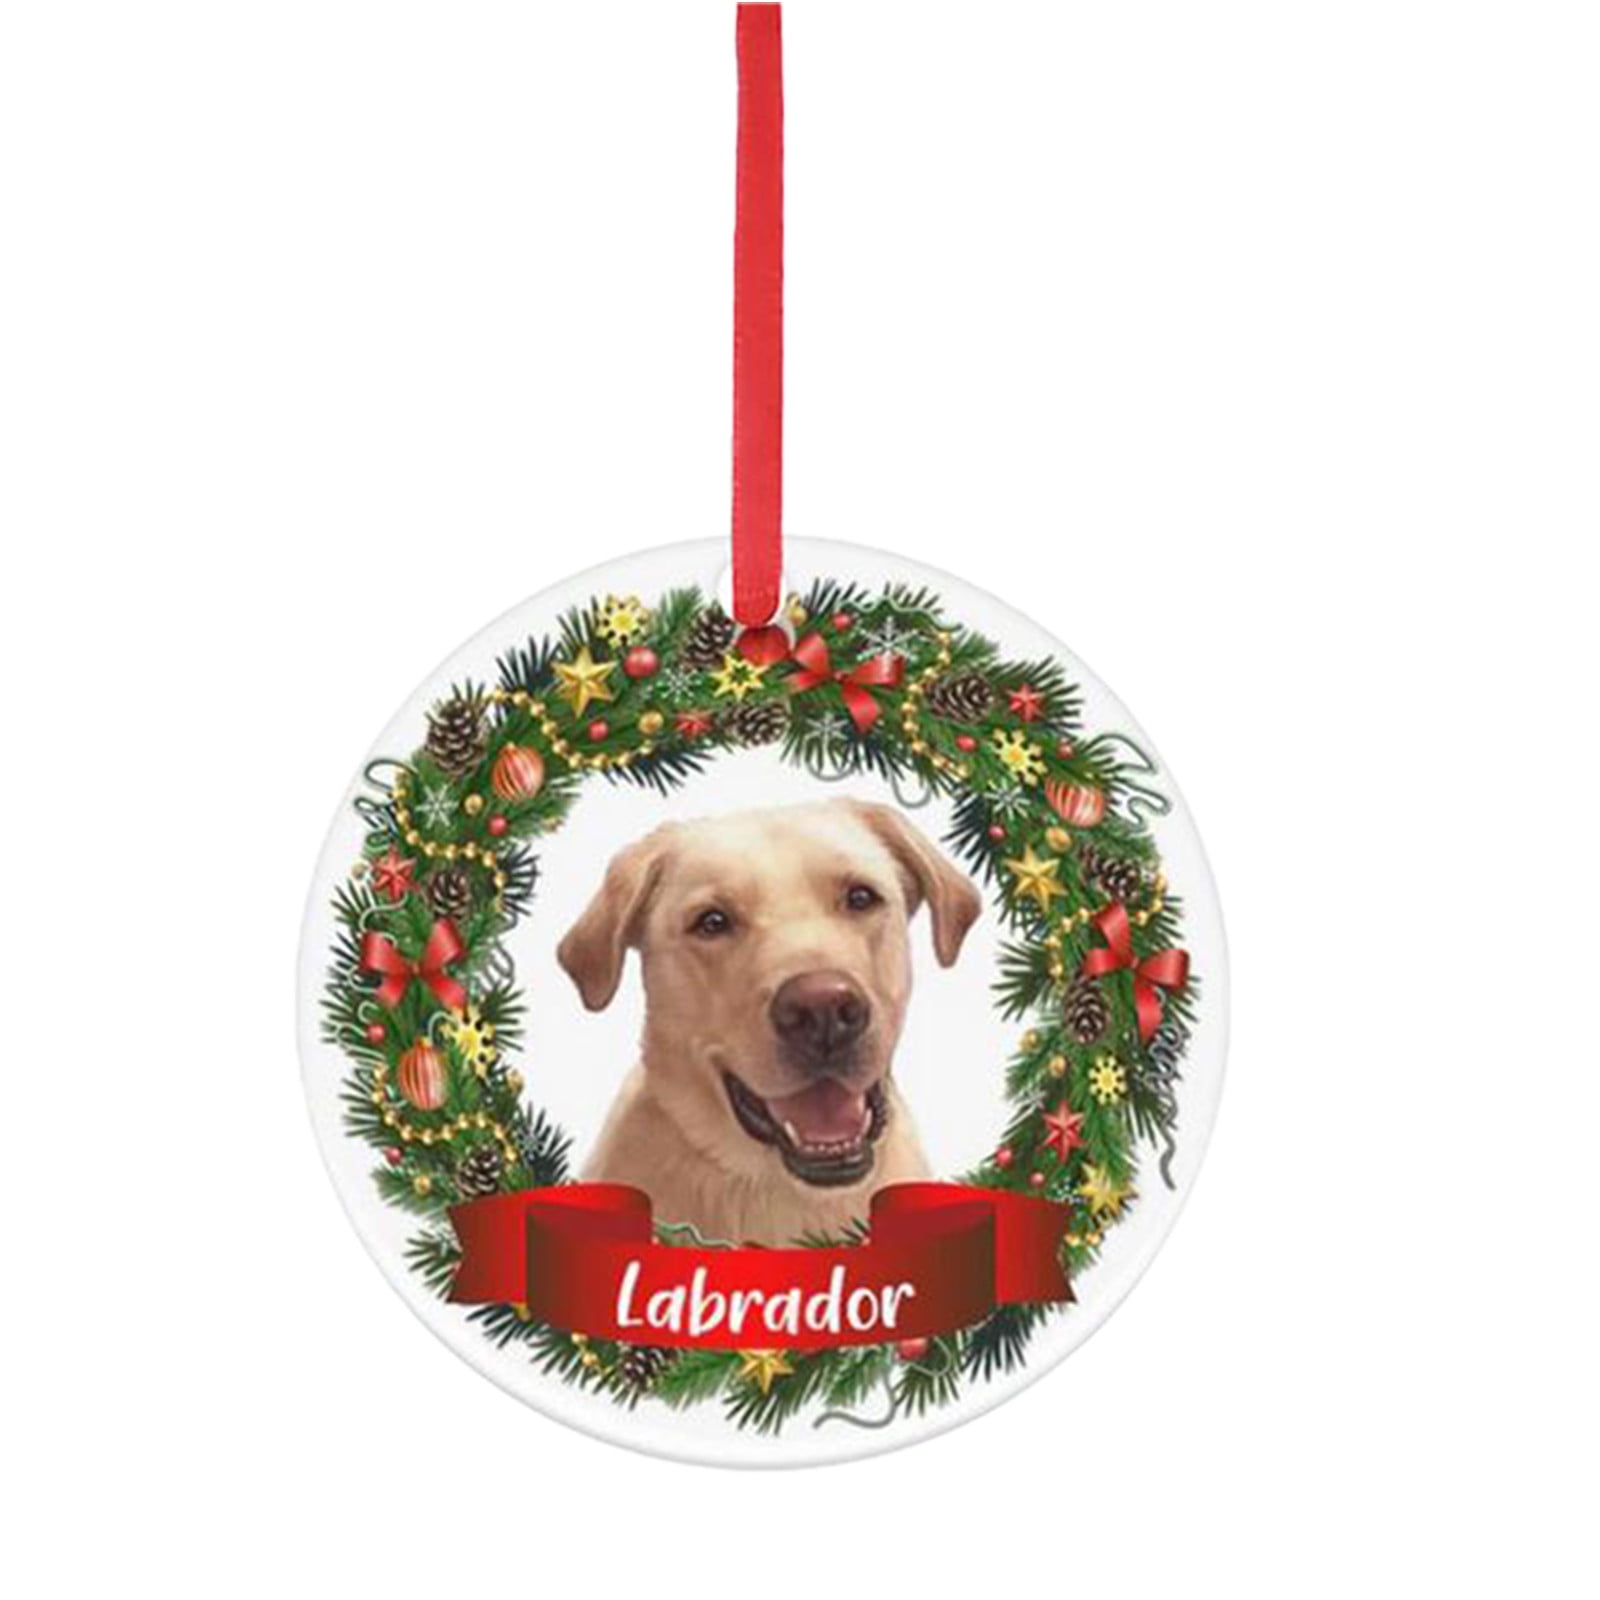 Wooden Golden Retriever Dog with Wreath Christmas Ornament Plaque Sign NEW 